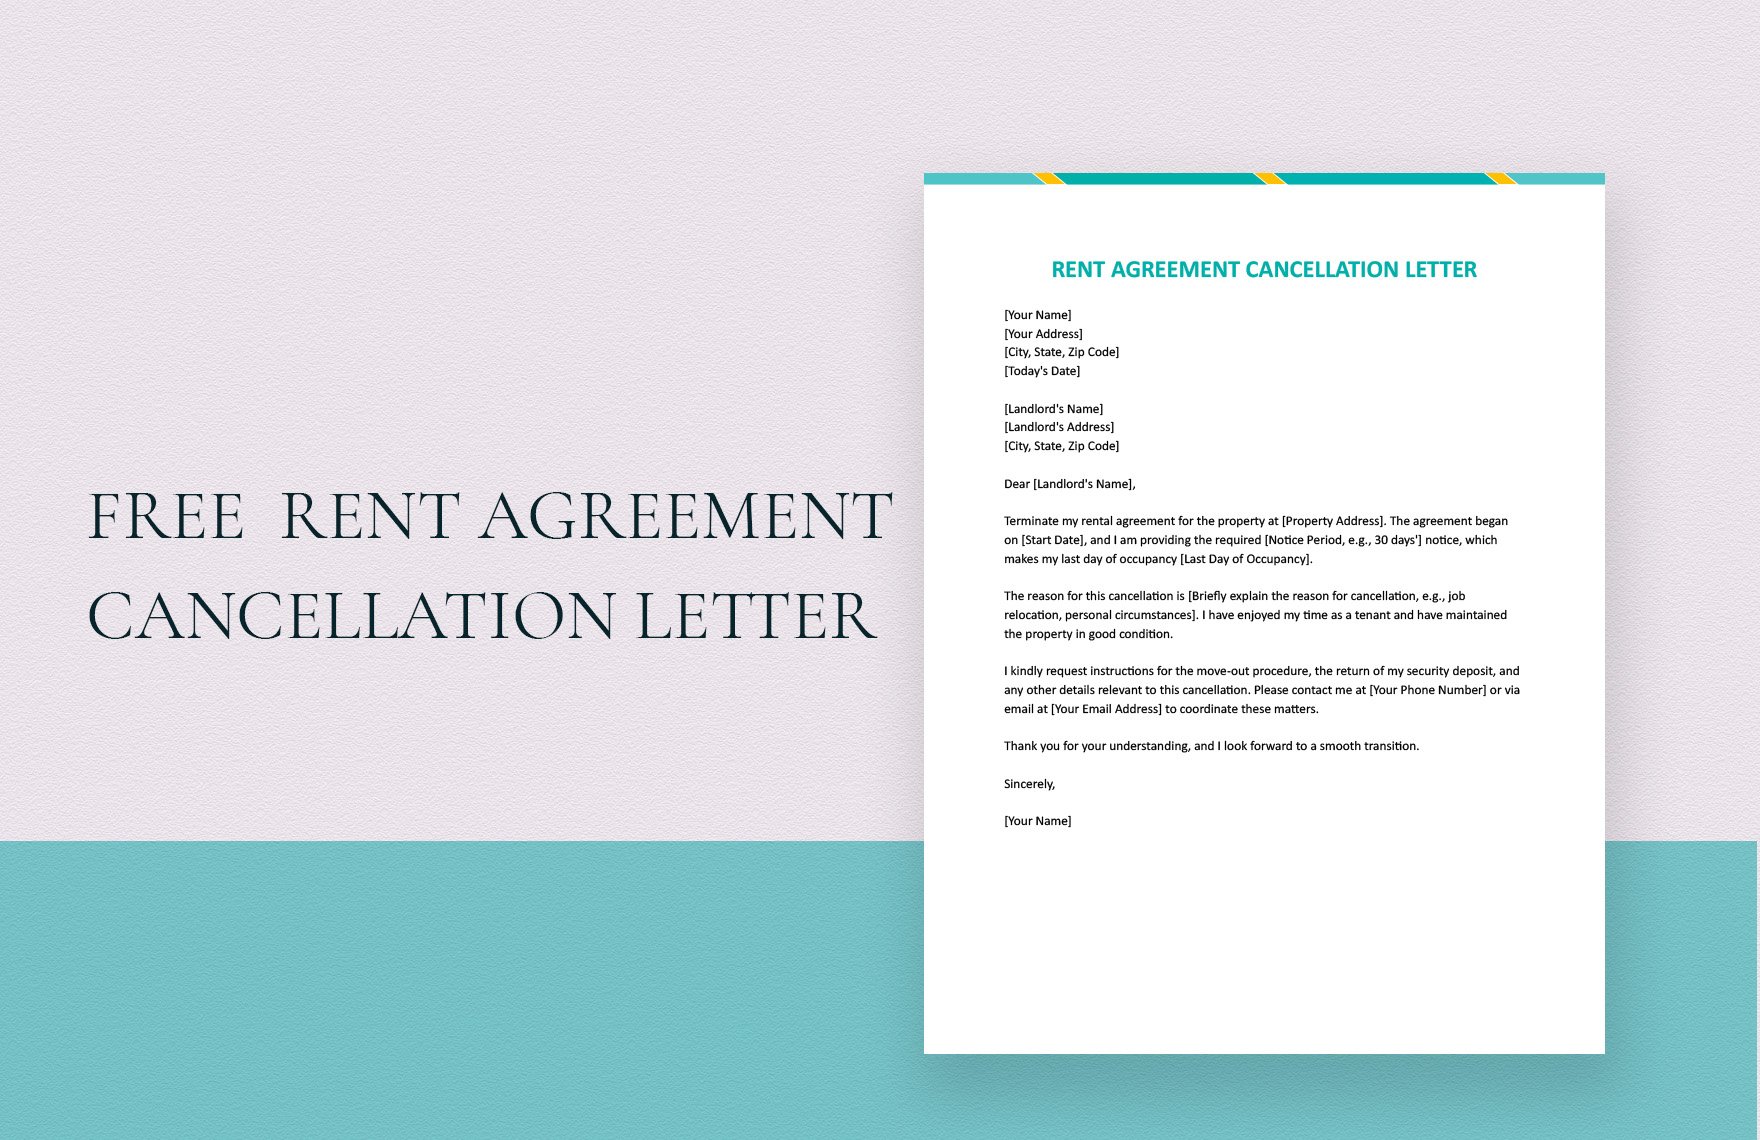 Rent Agreement Cancellation Letter in Word, Google Docs